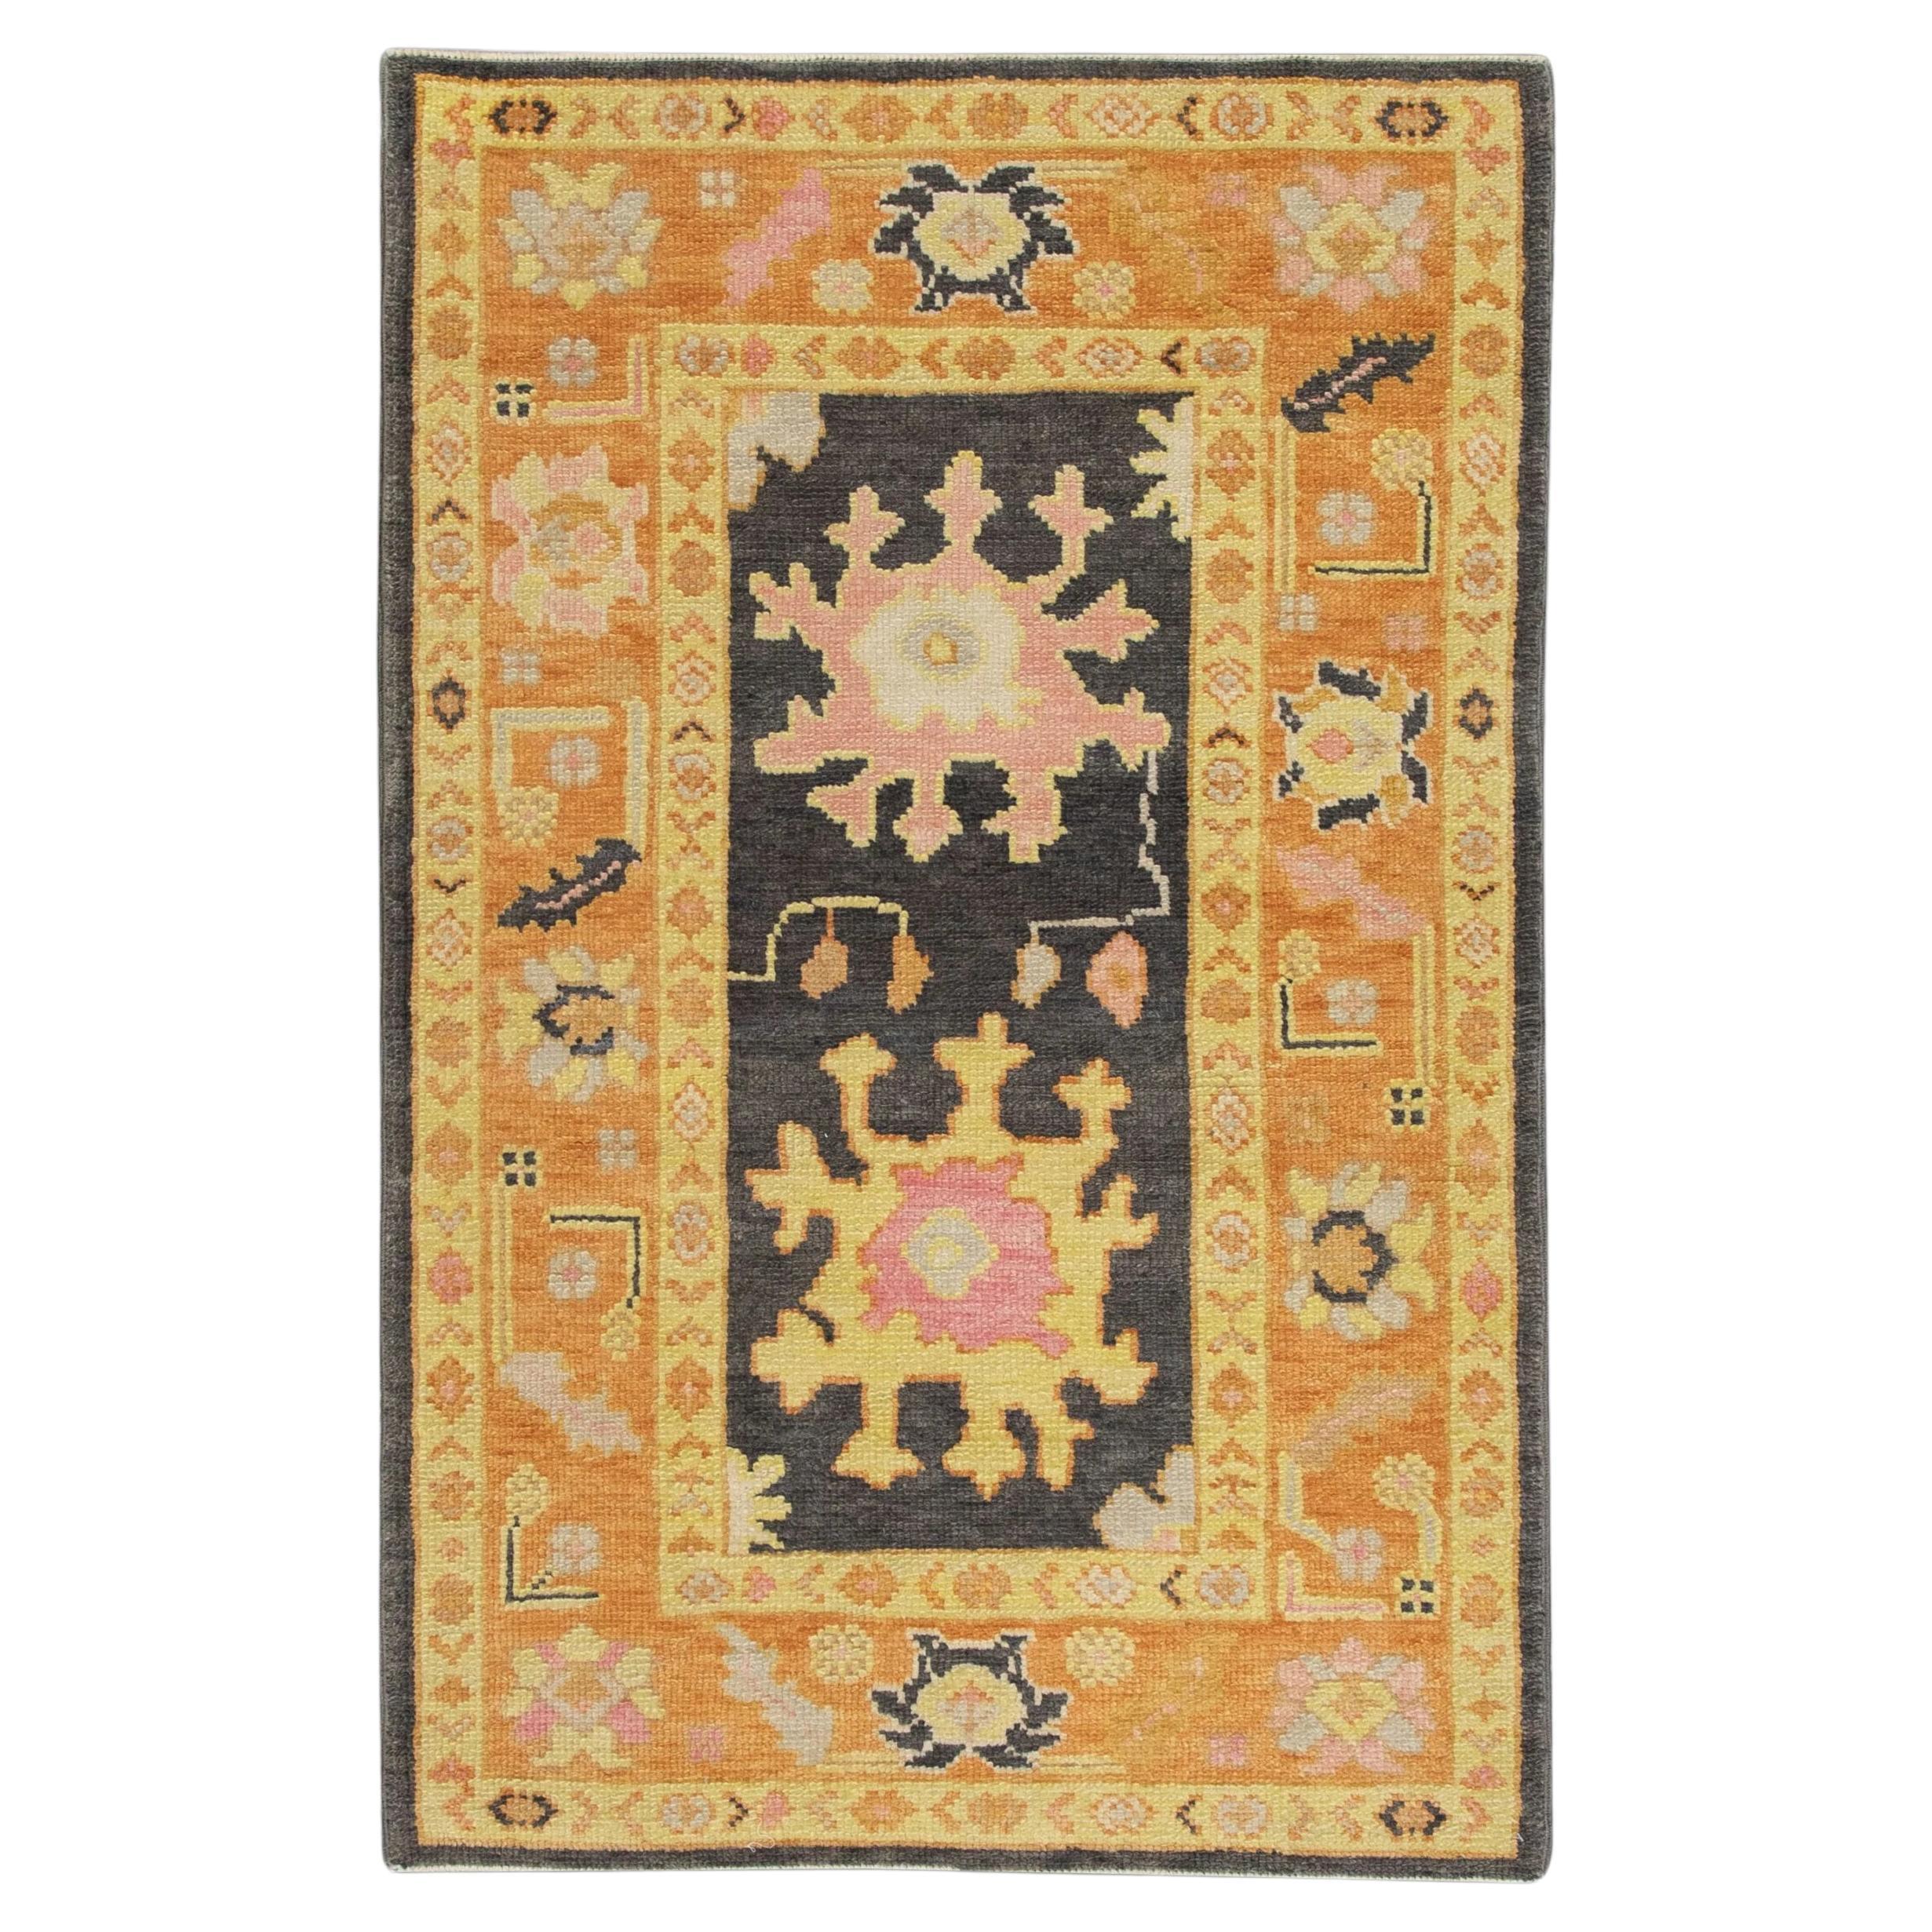 Handwoven Turkish Oushak Rug with Orange and Pink Floral Design 3'1" x 4'8"